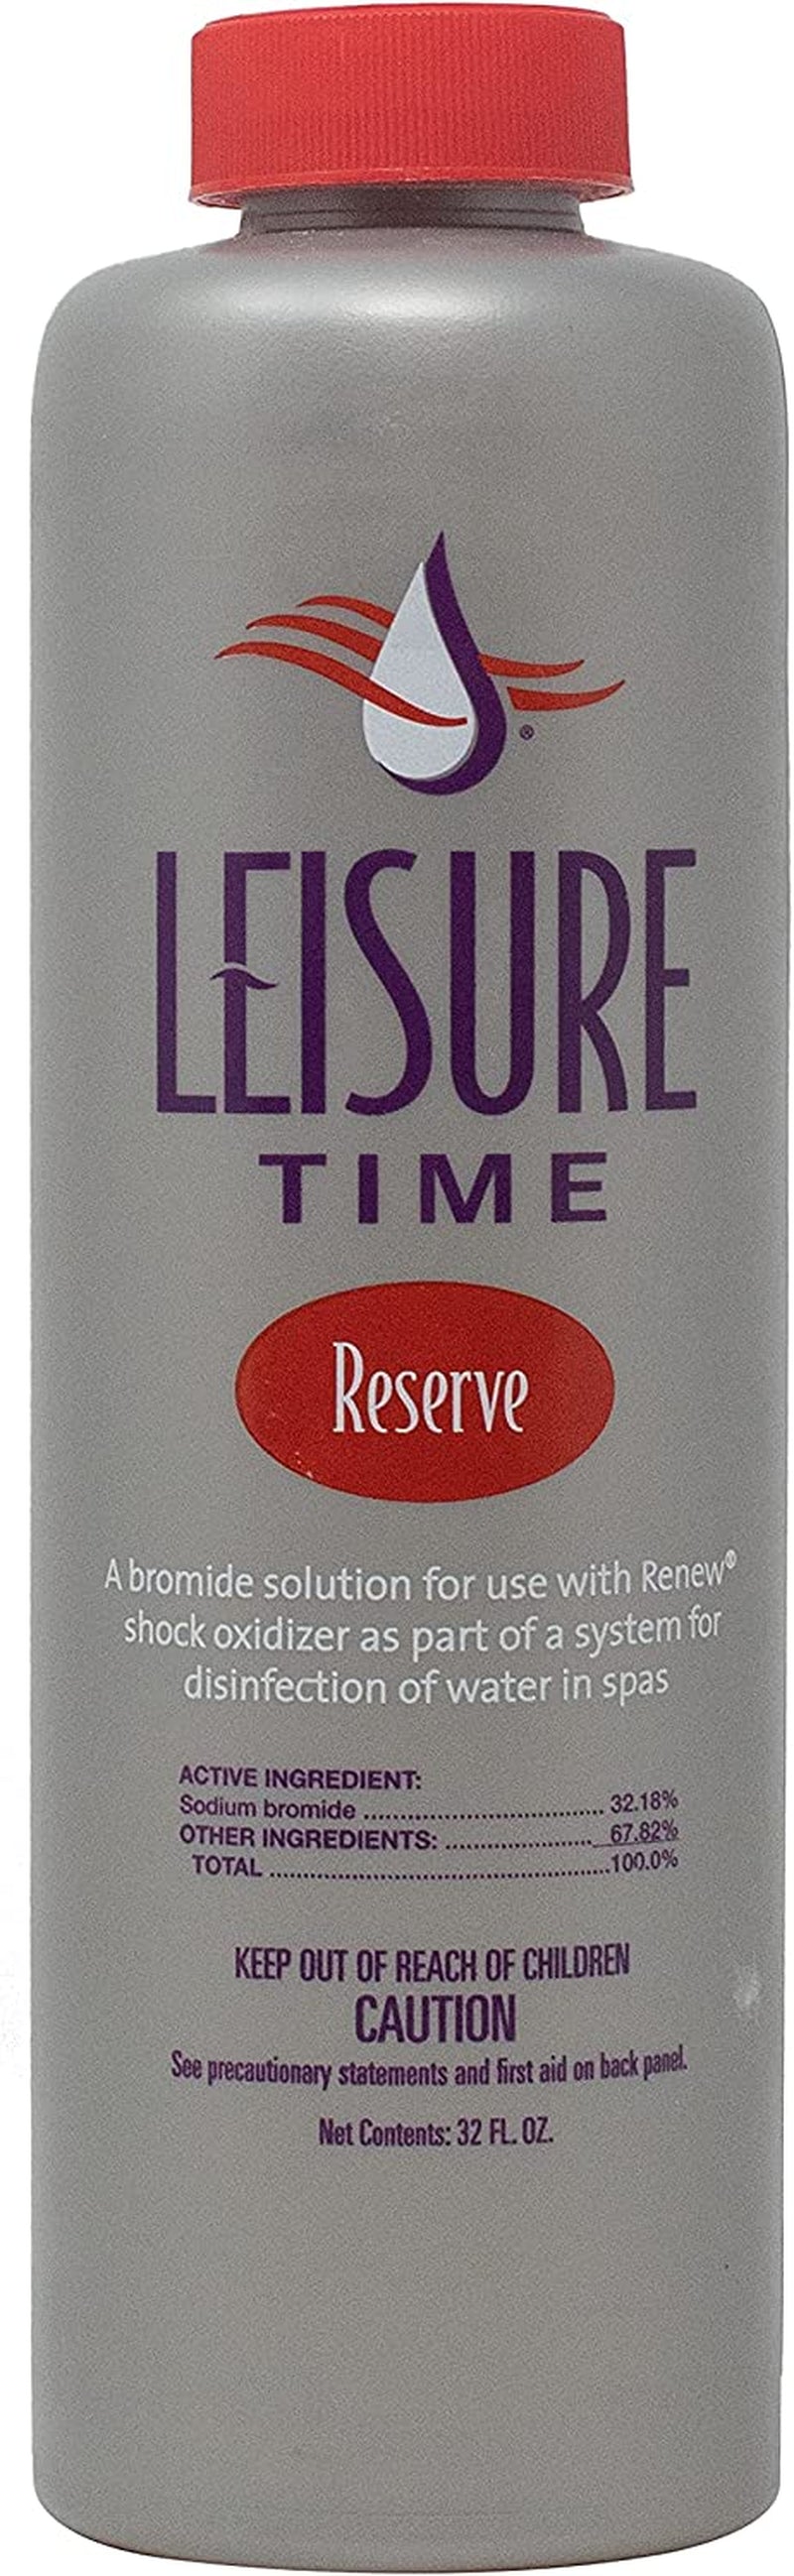 LEISURE TIME, Leisure Time 45300 Reserve Sanitizer for Spas and Hot Tubs, 1 Qt